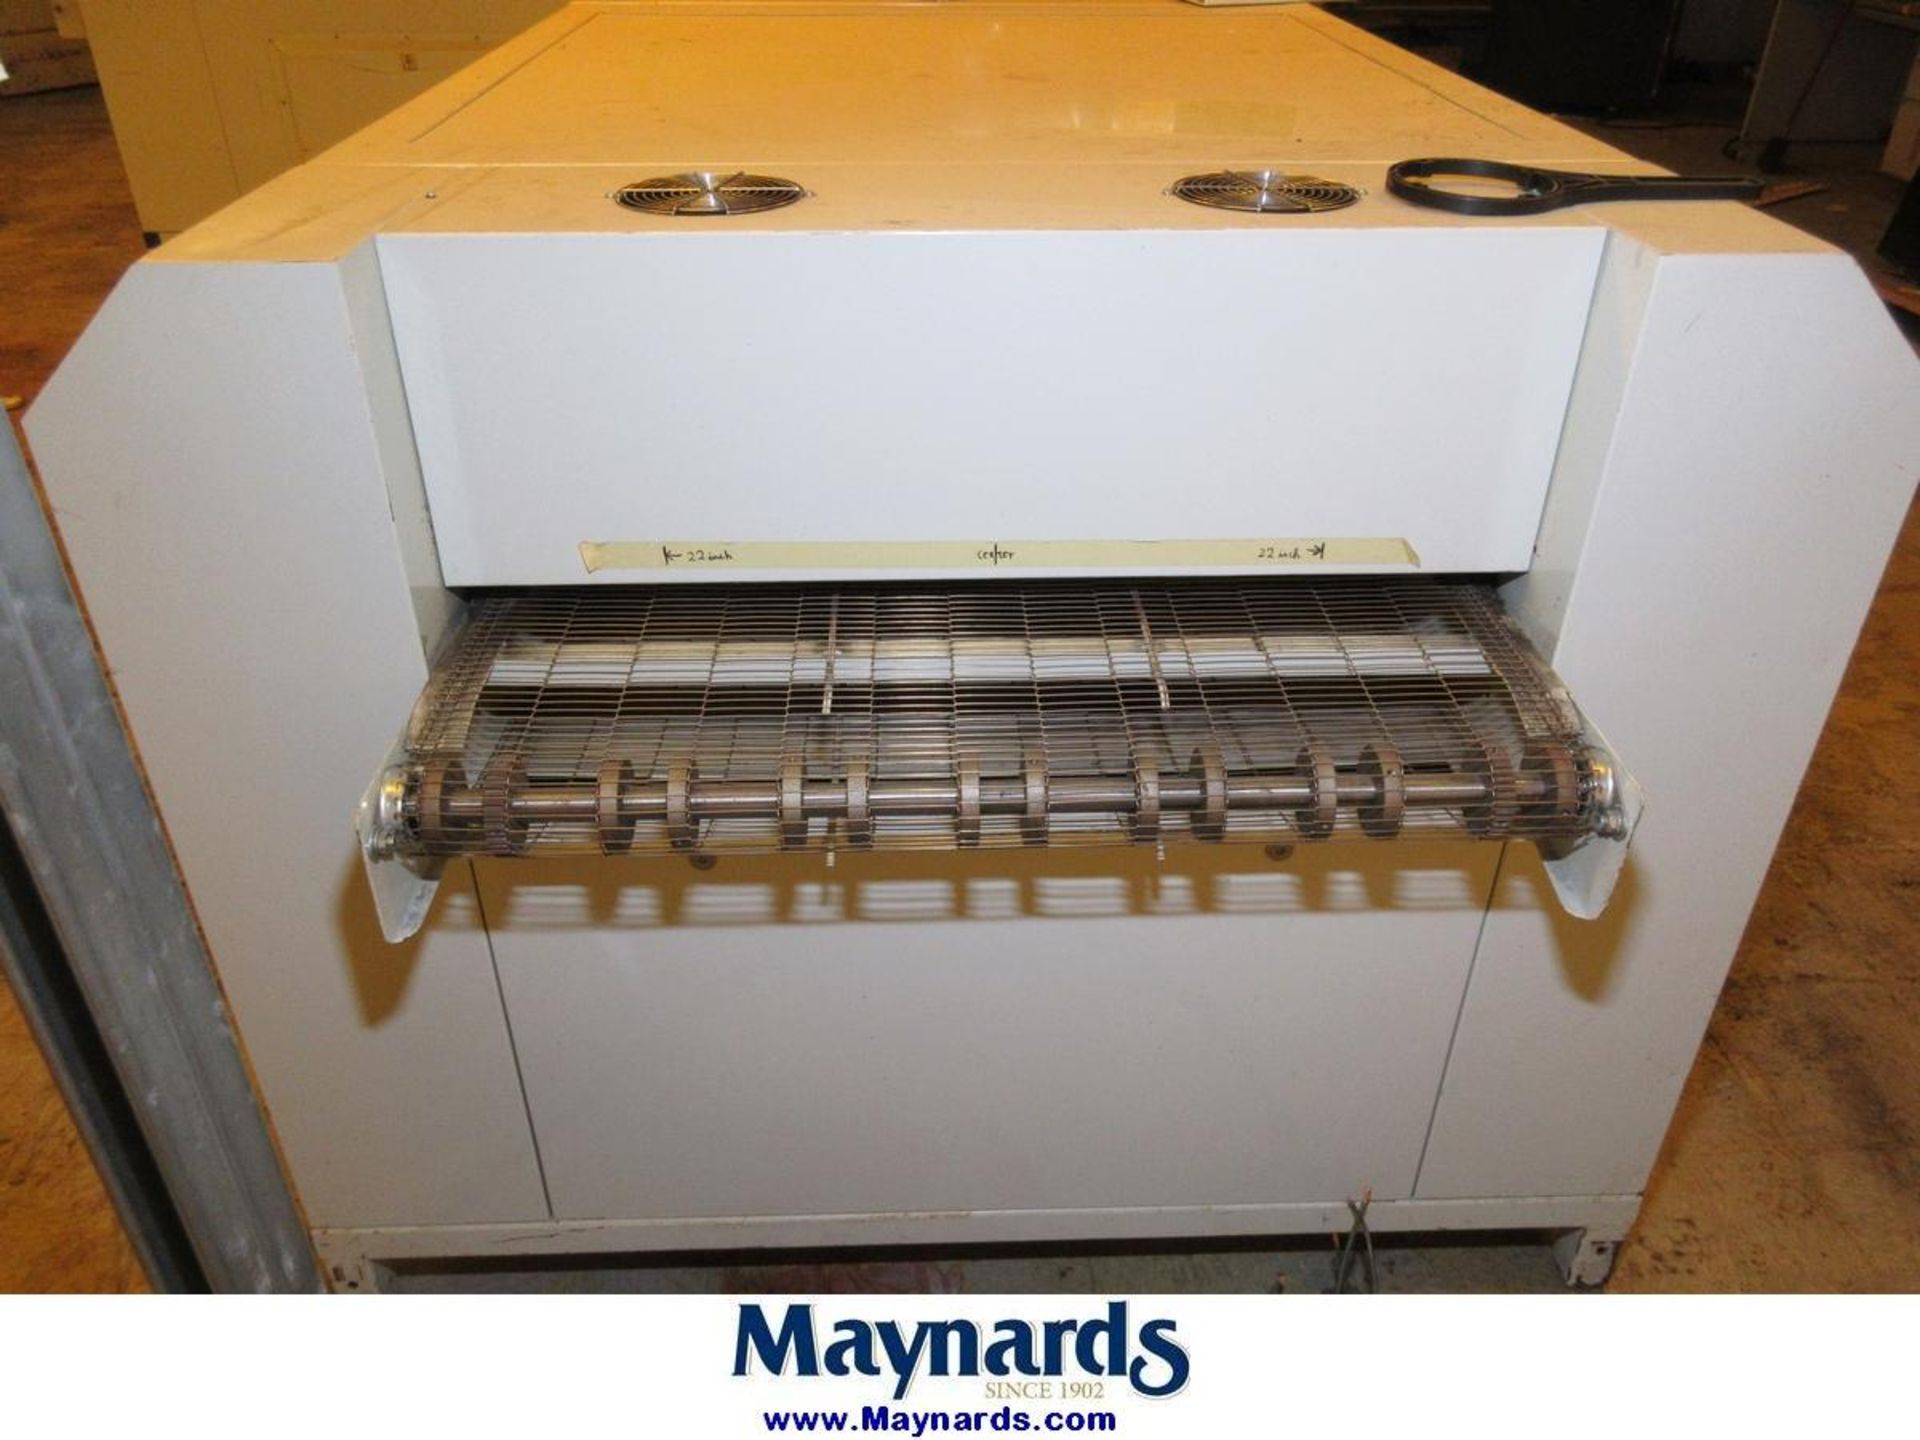 Wisconsin Oven Corp SPC-HD-34-S/125 34" Electric Conveyor Pass Through Plate Oven - Image 5 of 9